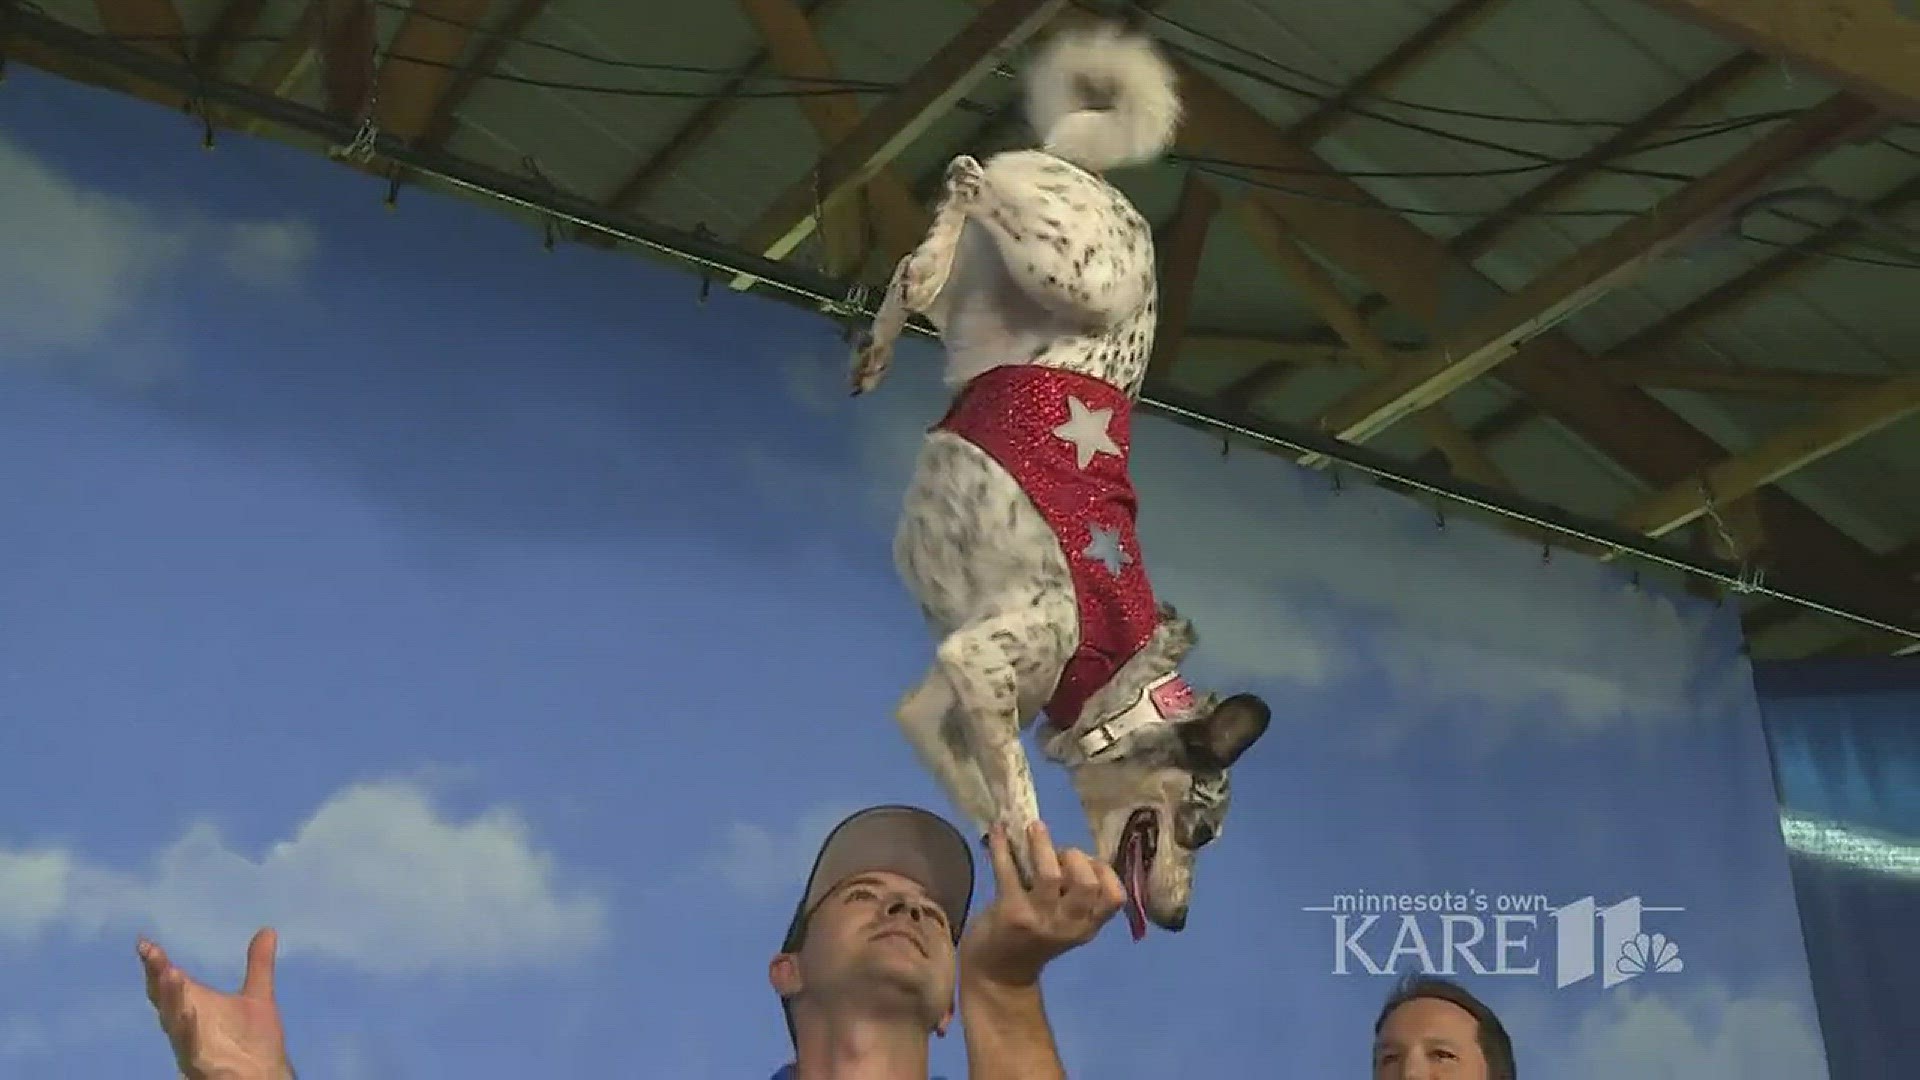 The "All-Star Stunt Dogs" complete stunts like dock dives, flying leaps, jump rope, walking backwards and even paw-stands. Even more special, they're all from shelters. http://kare11.tv/2x17Far